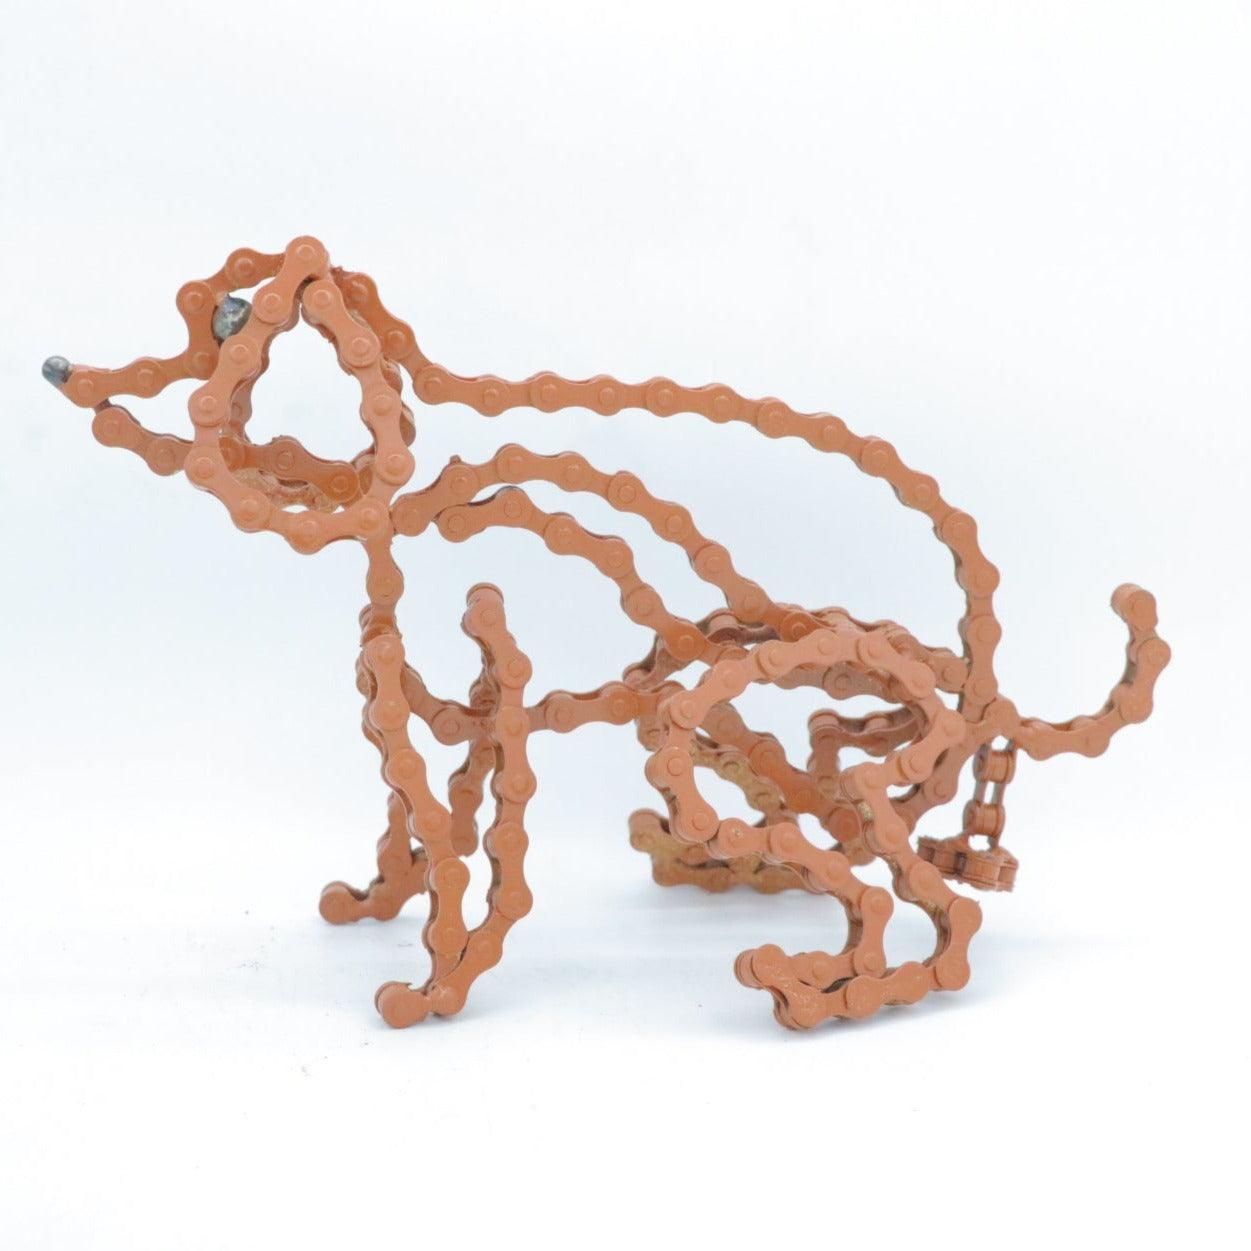 Pooping Dog Sculpture (Tuzzi) | UNCHAINED by NIRIT LEVAV PACKER